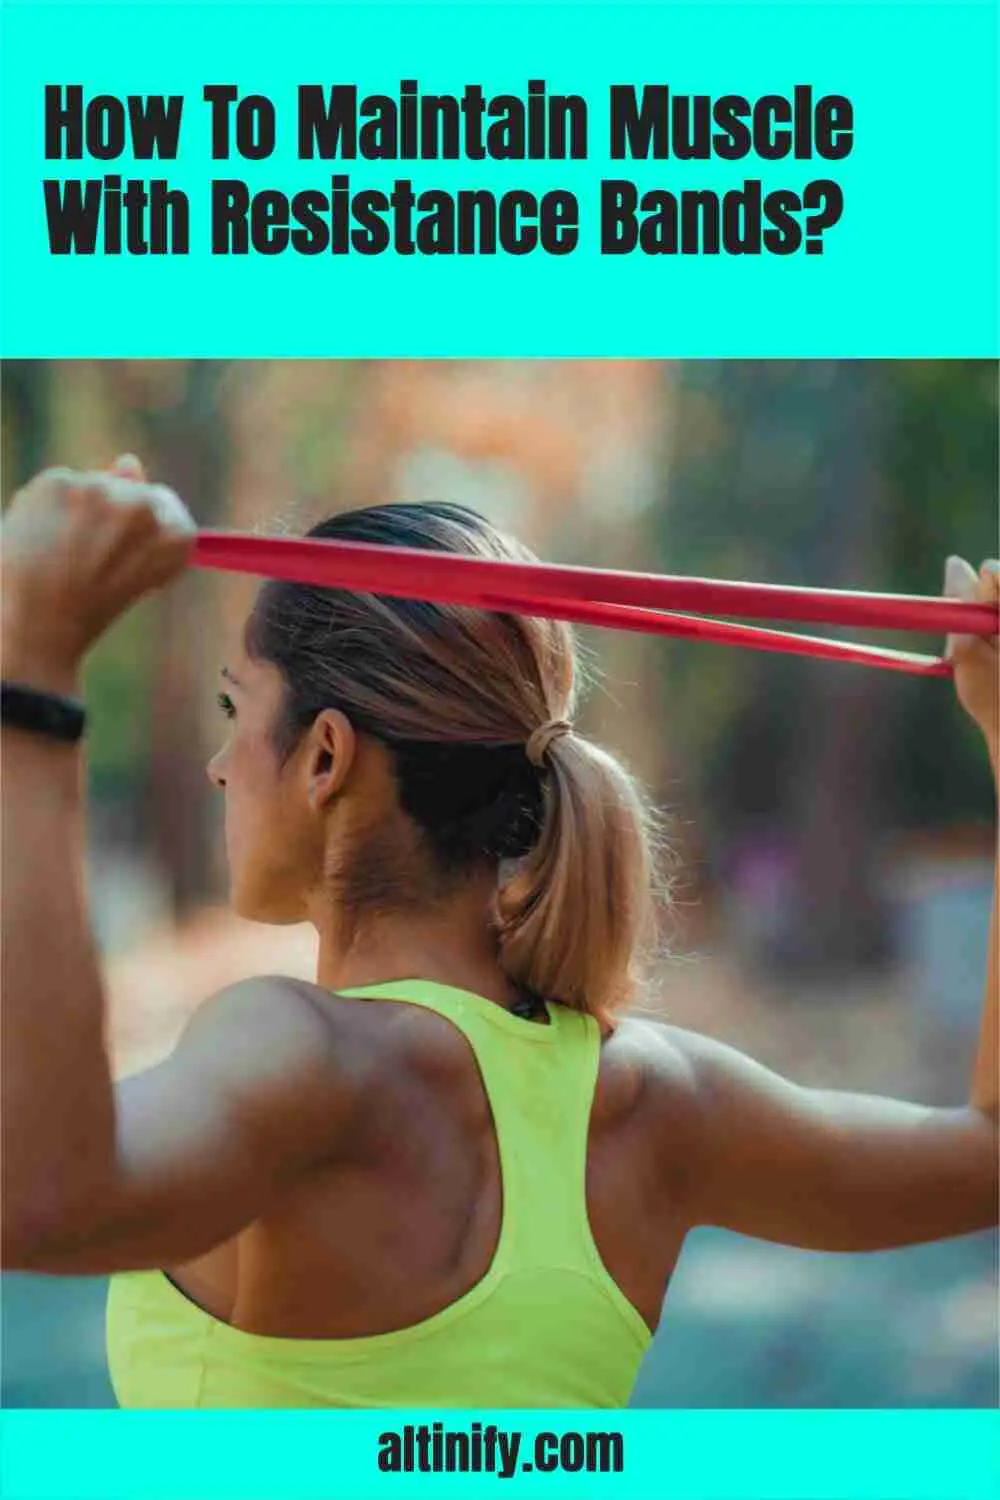 How To Maintain Muscle With Resistance Bands